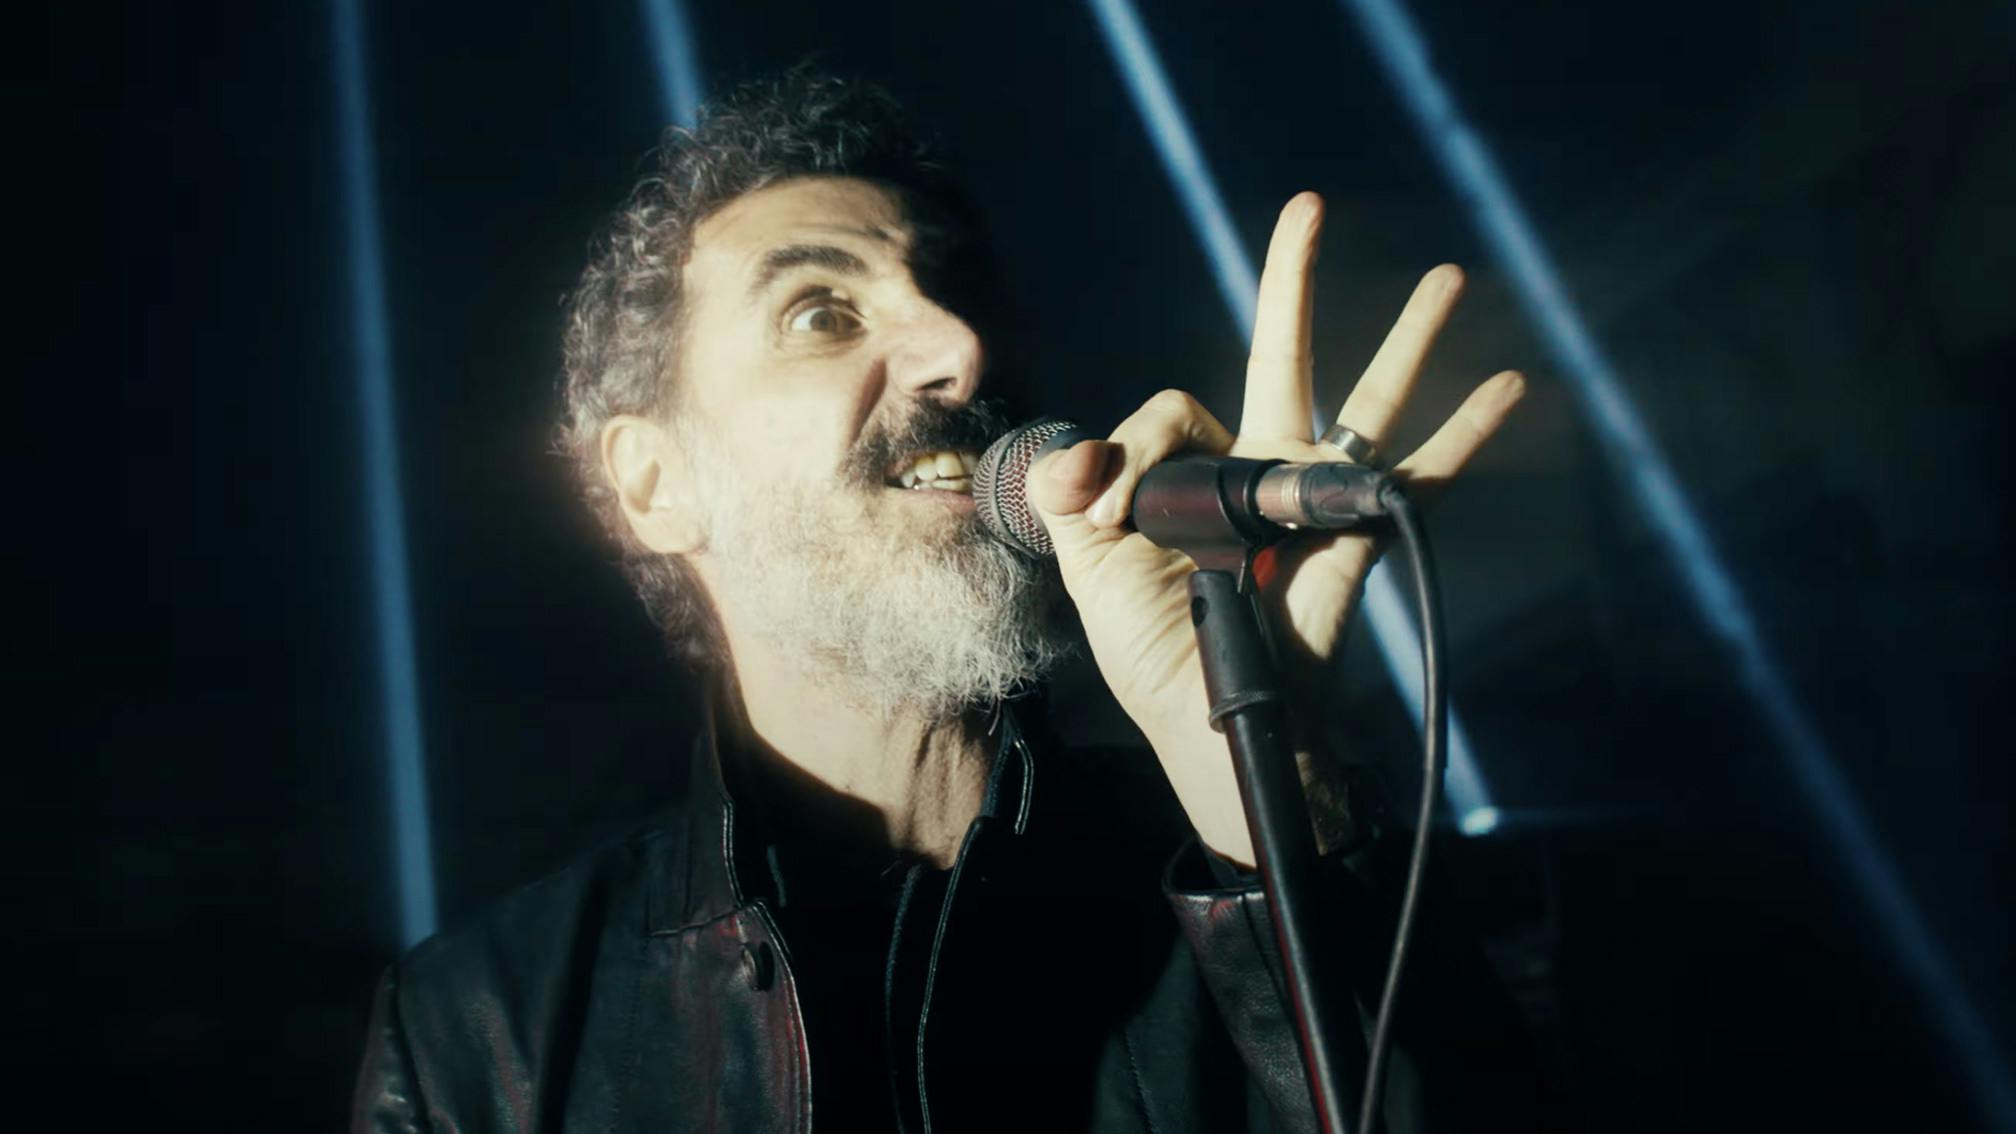 System Of A Down drop new video for Genocidal Humanoidz